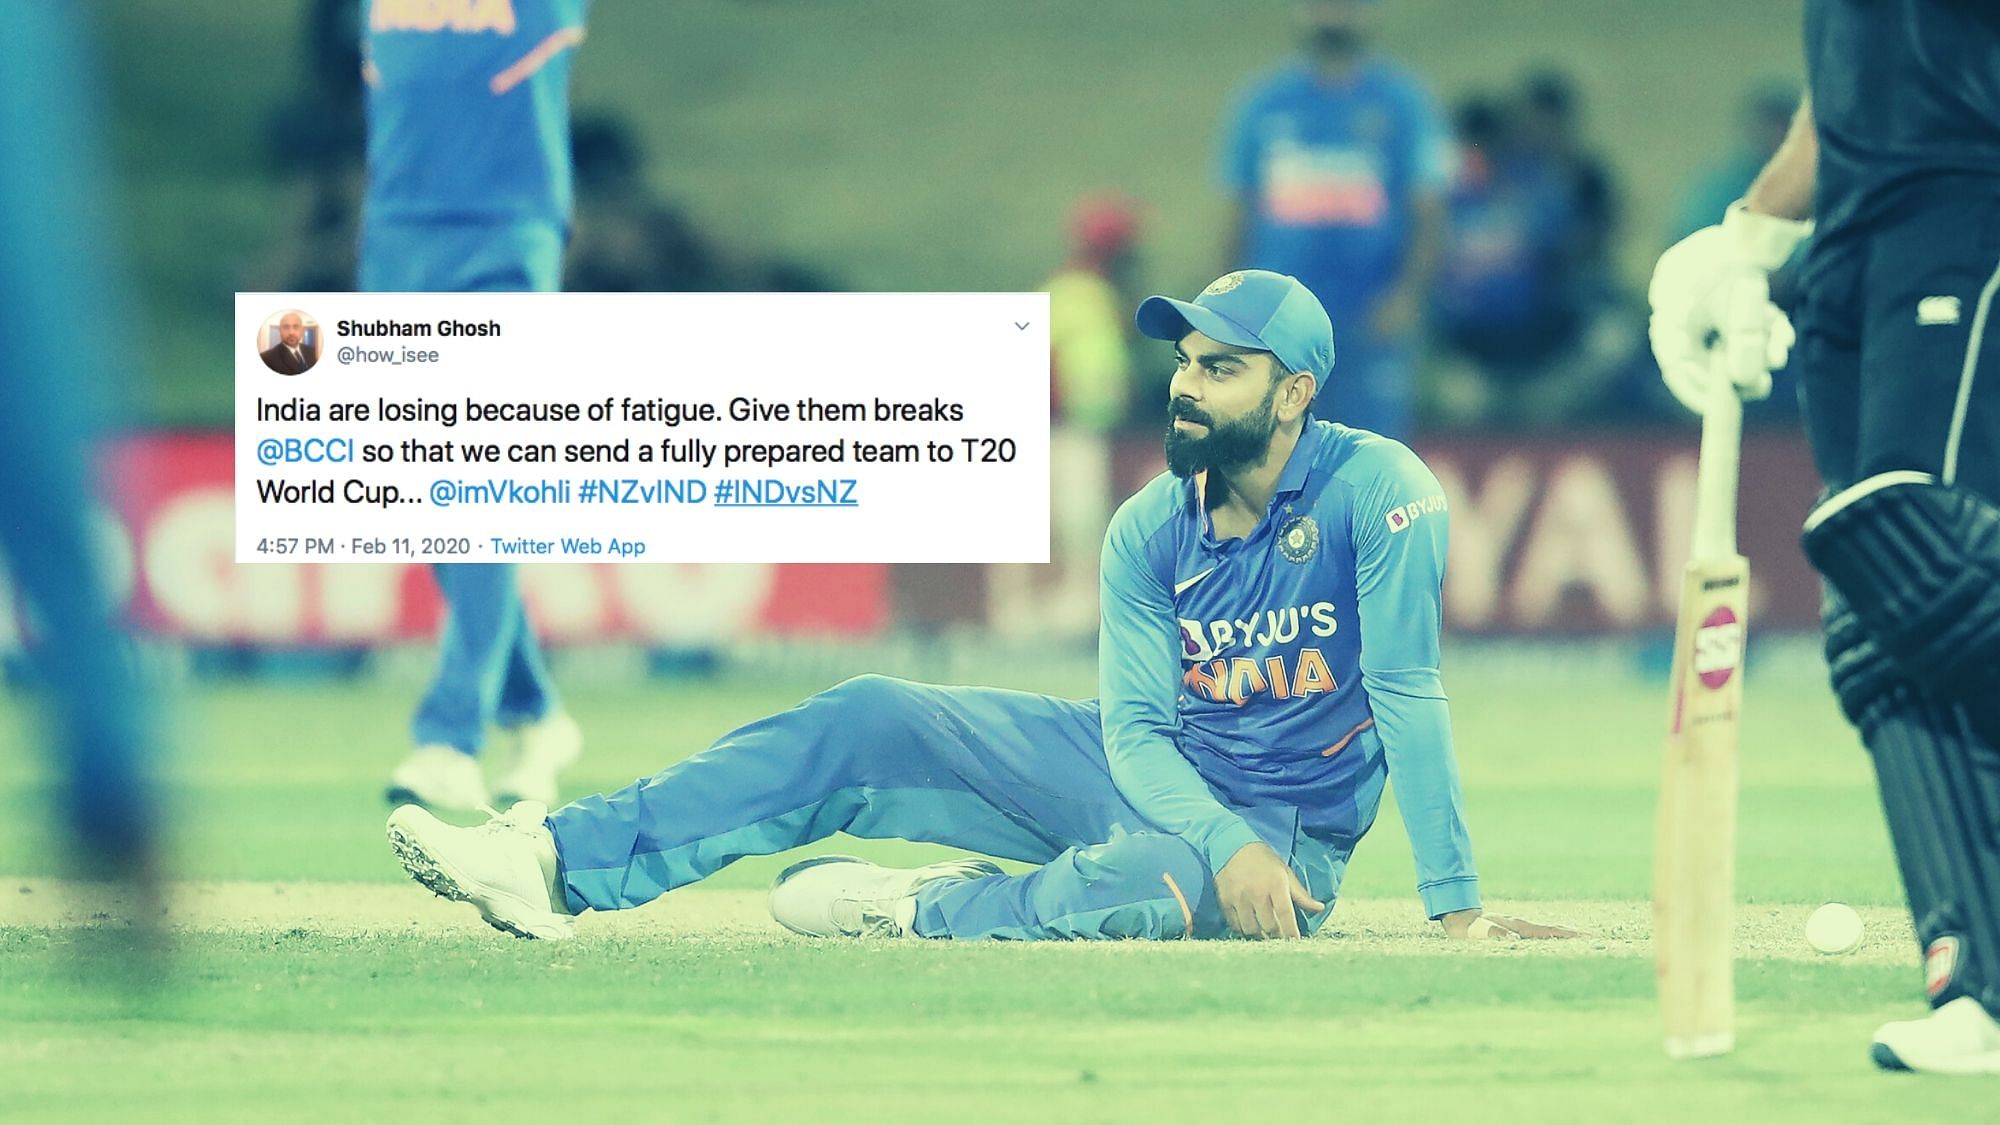 Twitteratis blamed fatigue as the reason behind India’s 3-0 series loss against New Zealand.